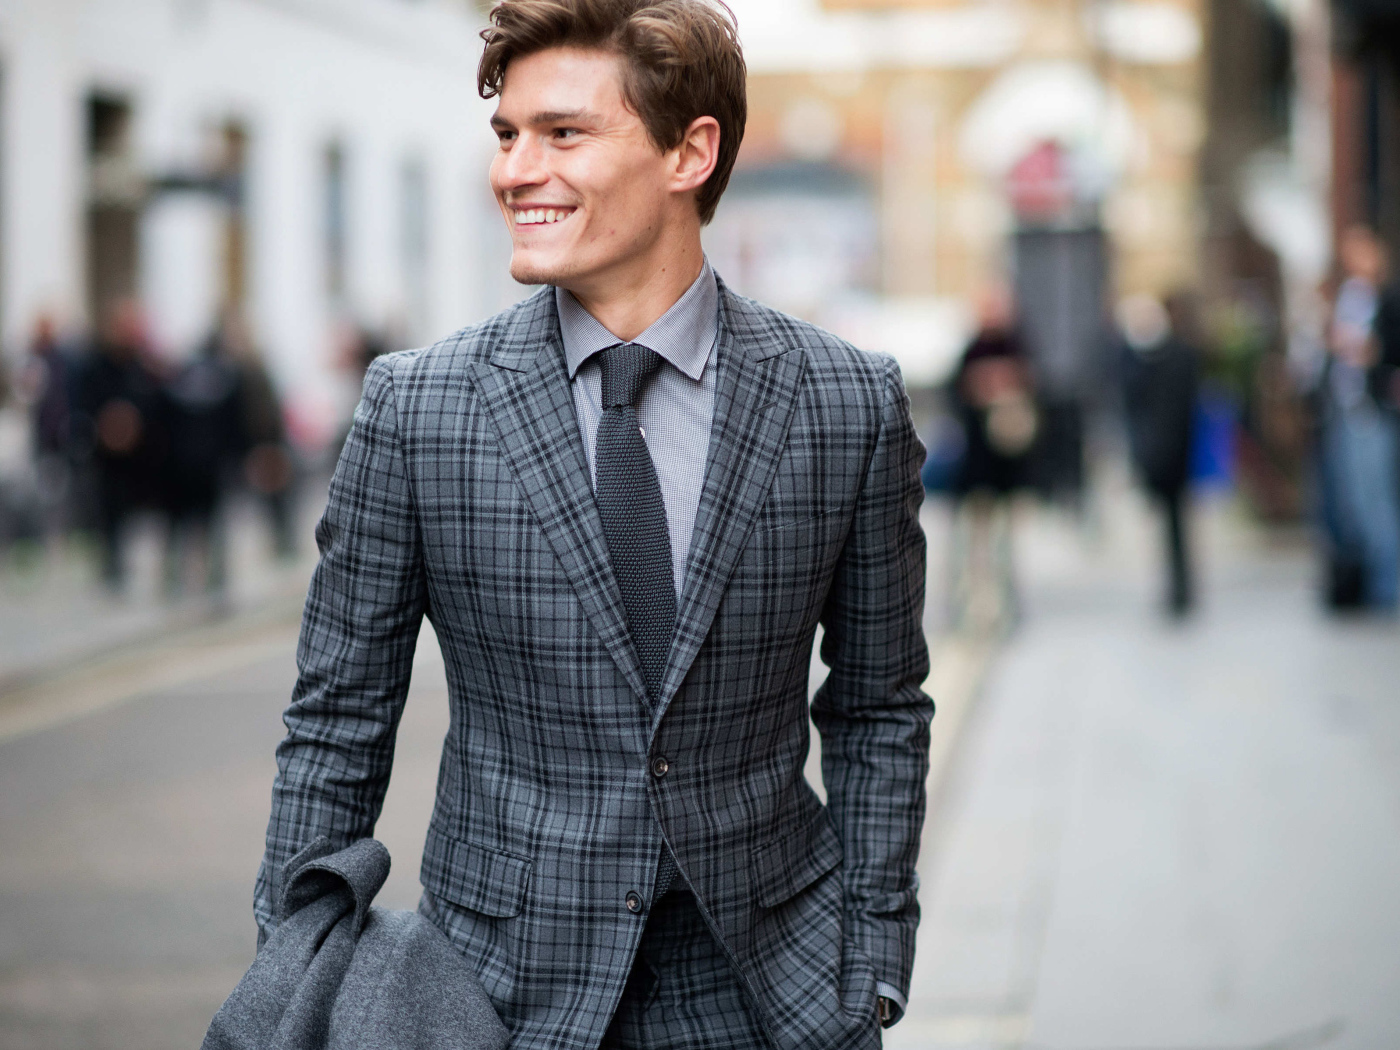 Smiling young man in suit